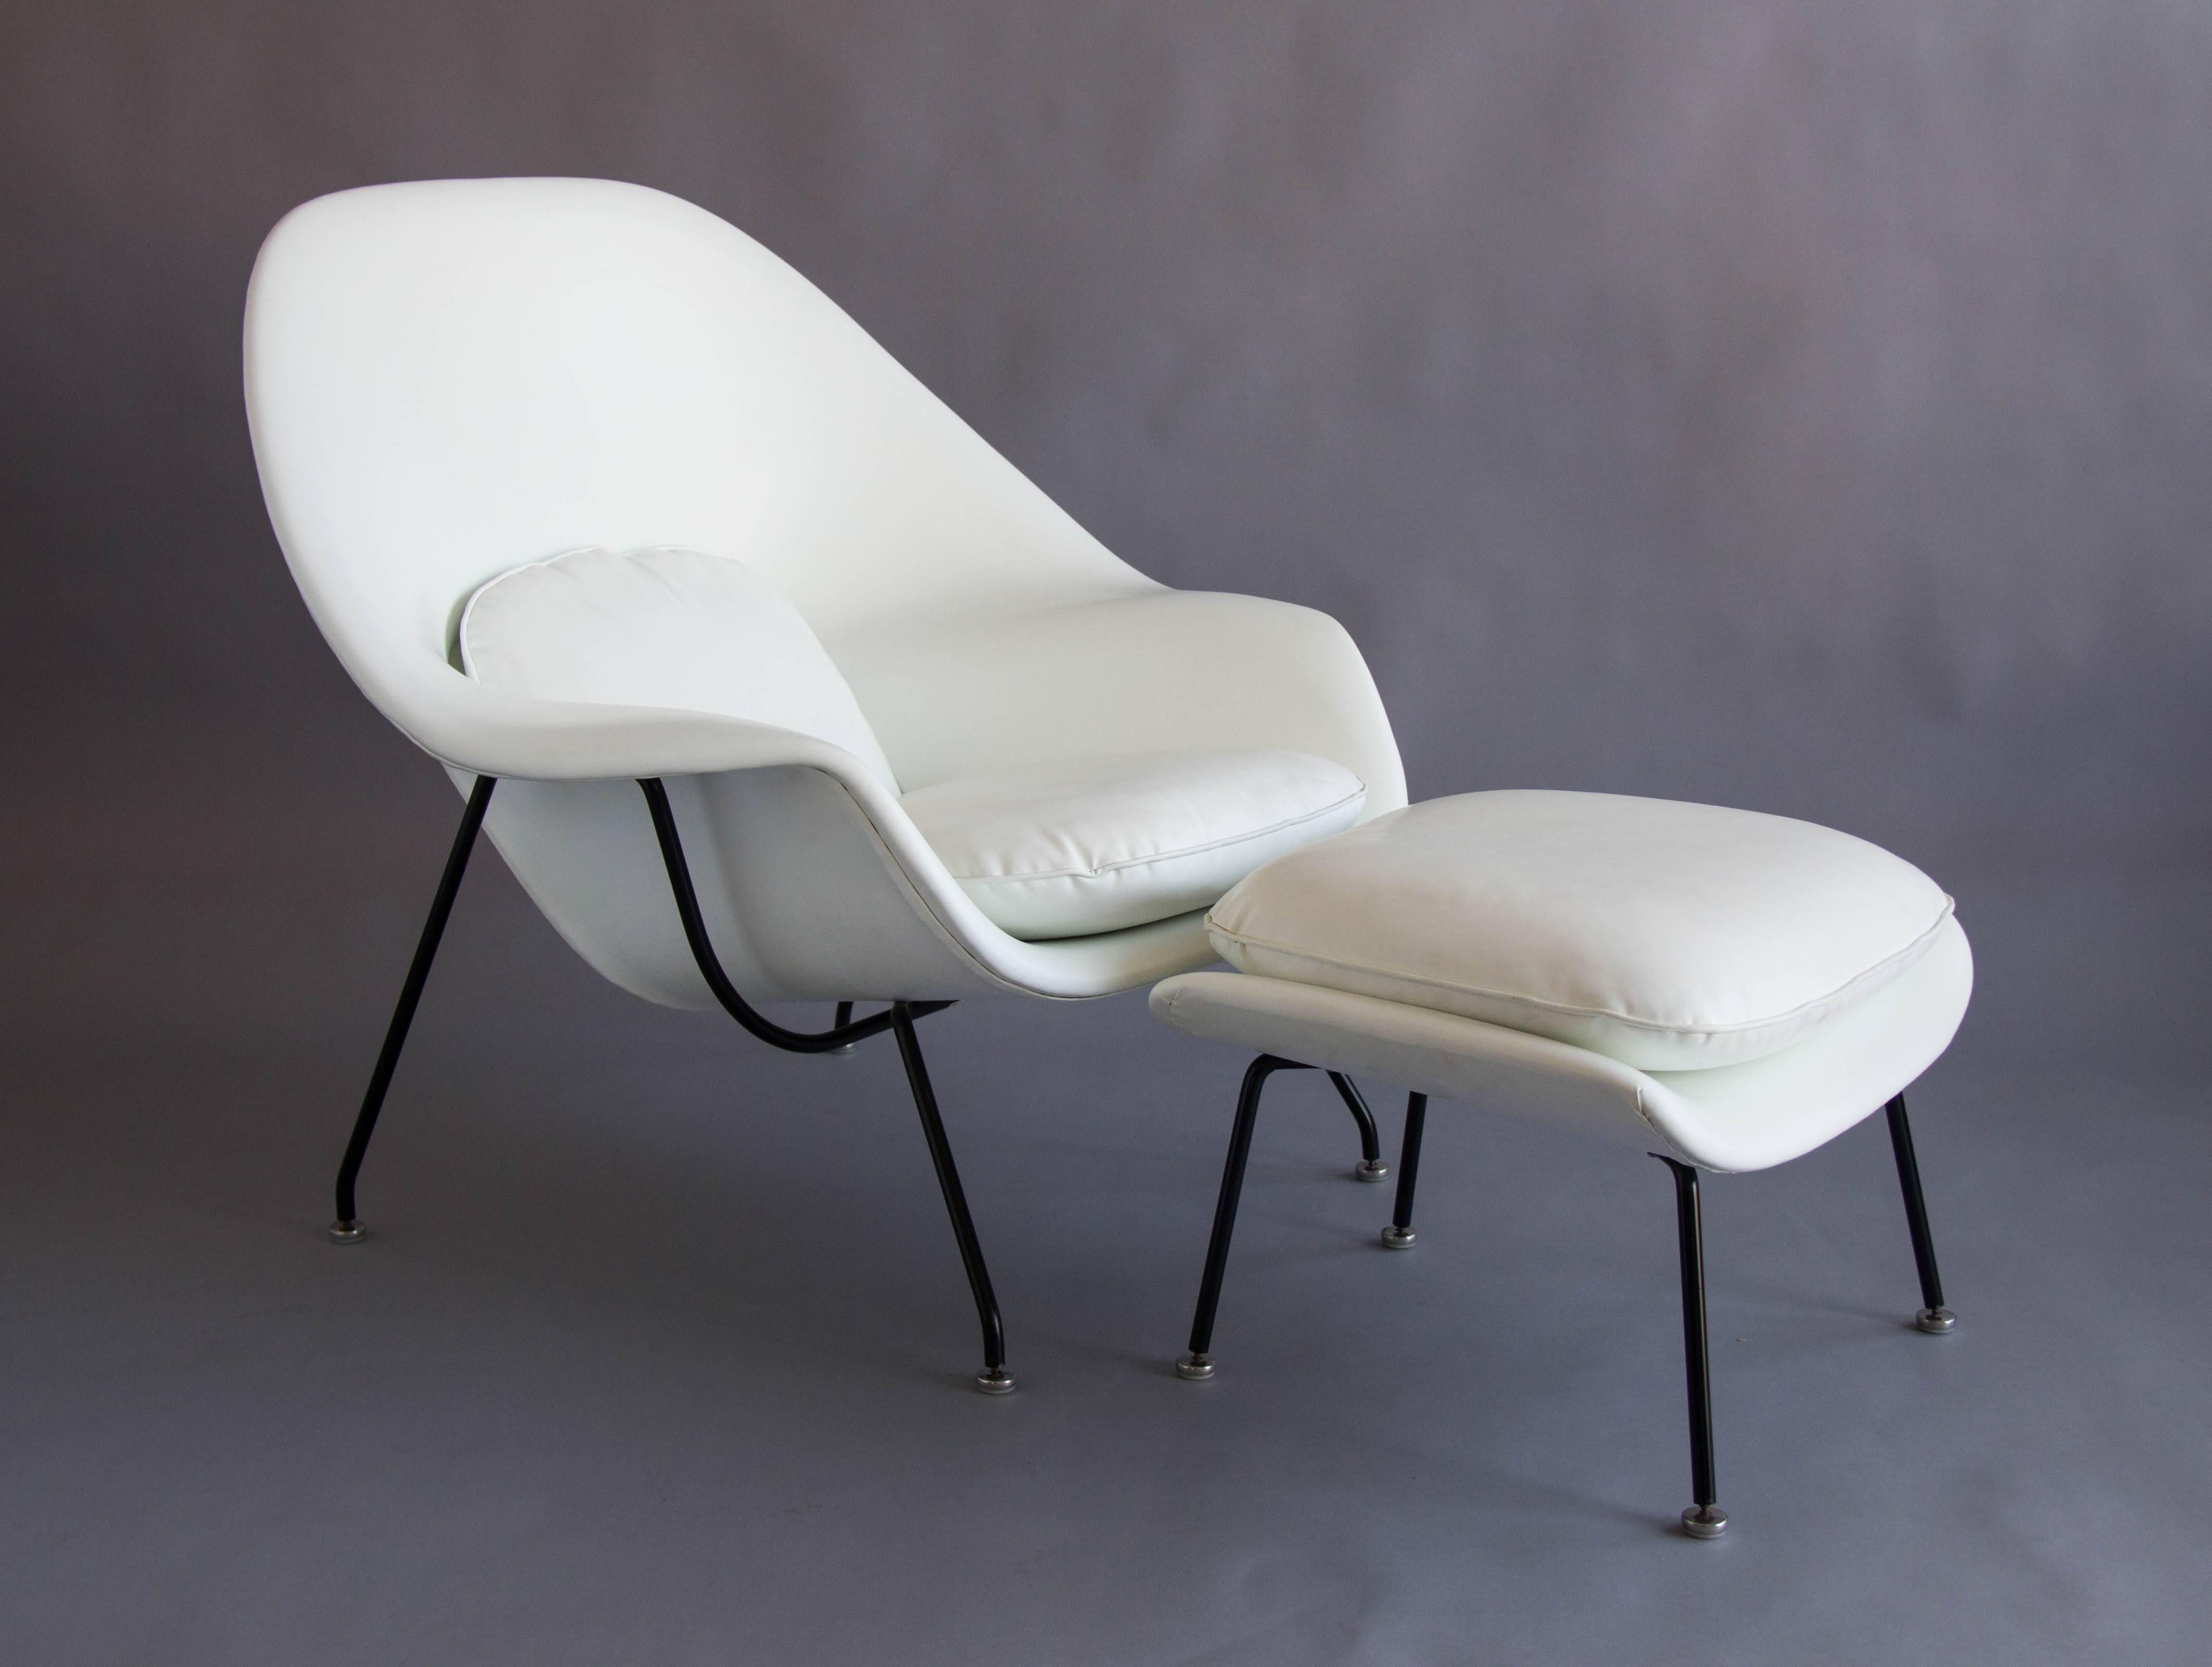 The iconic womb chair by Eero Saarinen for Knoll has a molded fiberglass shell and deceptively slender, minimal cushions, and sits atop a steel frame with angled legs. This 1960s example has the original white vinyl upholstery and black finish on